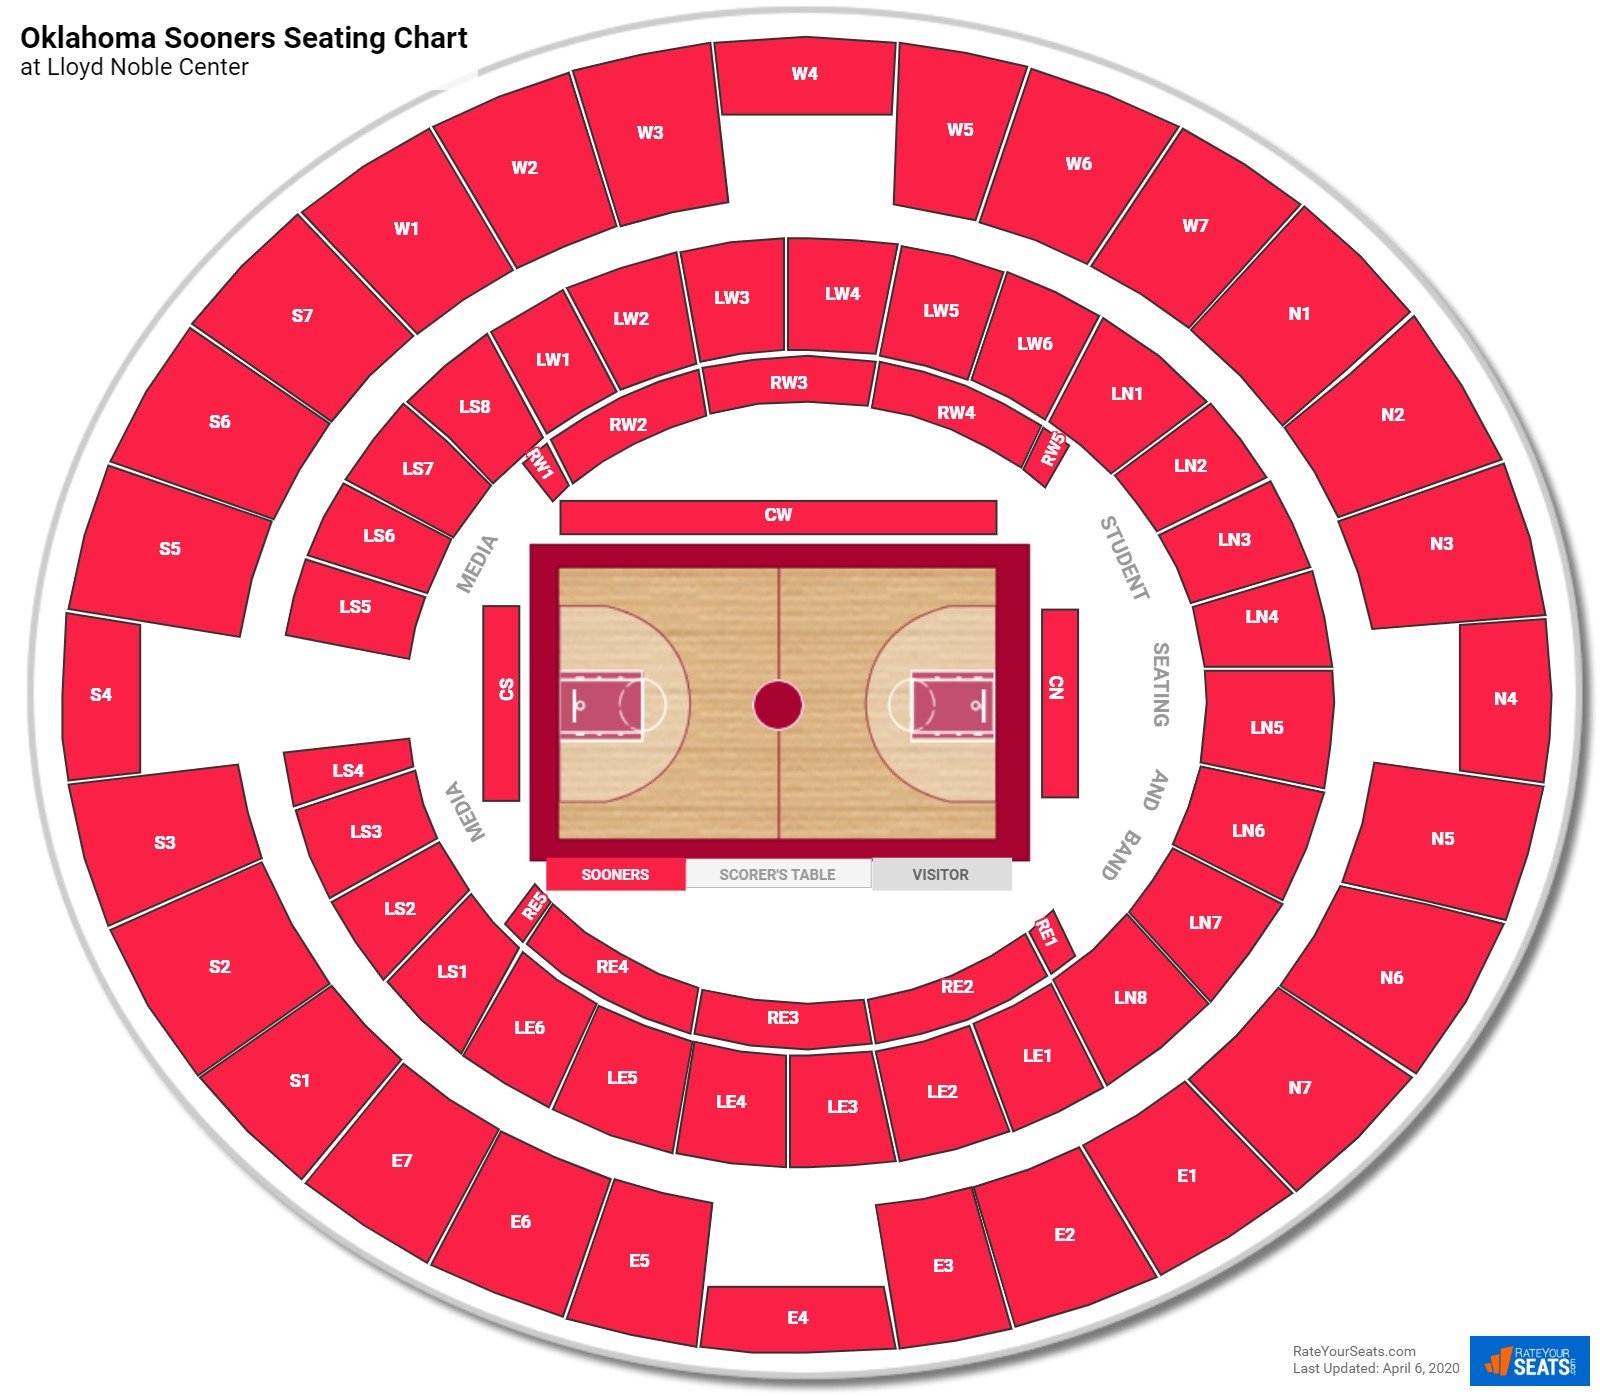 Lloyd Noble Center Upper Level End - Basketball Seating - RateYourSeats.com